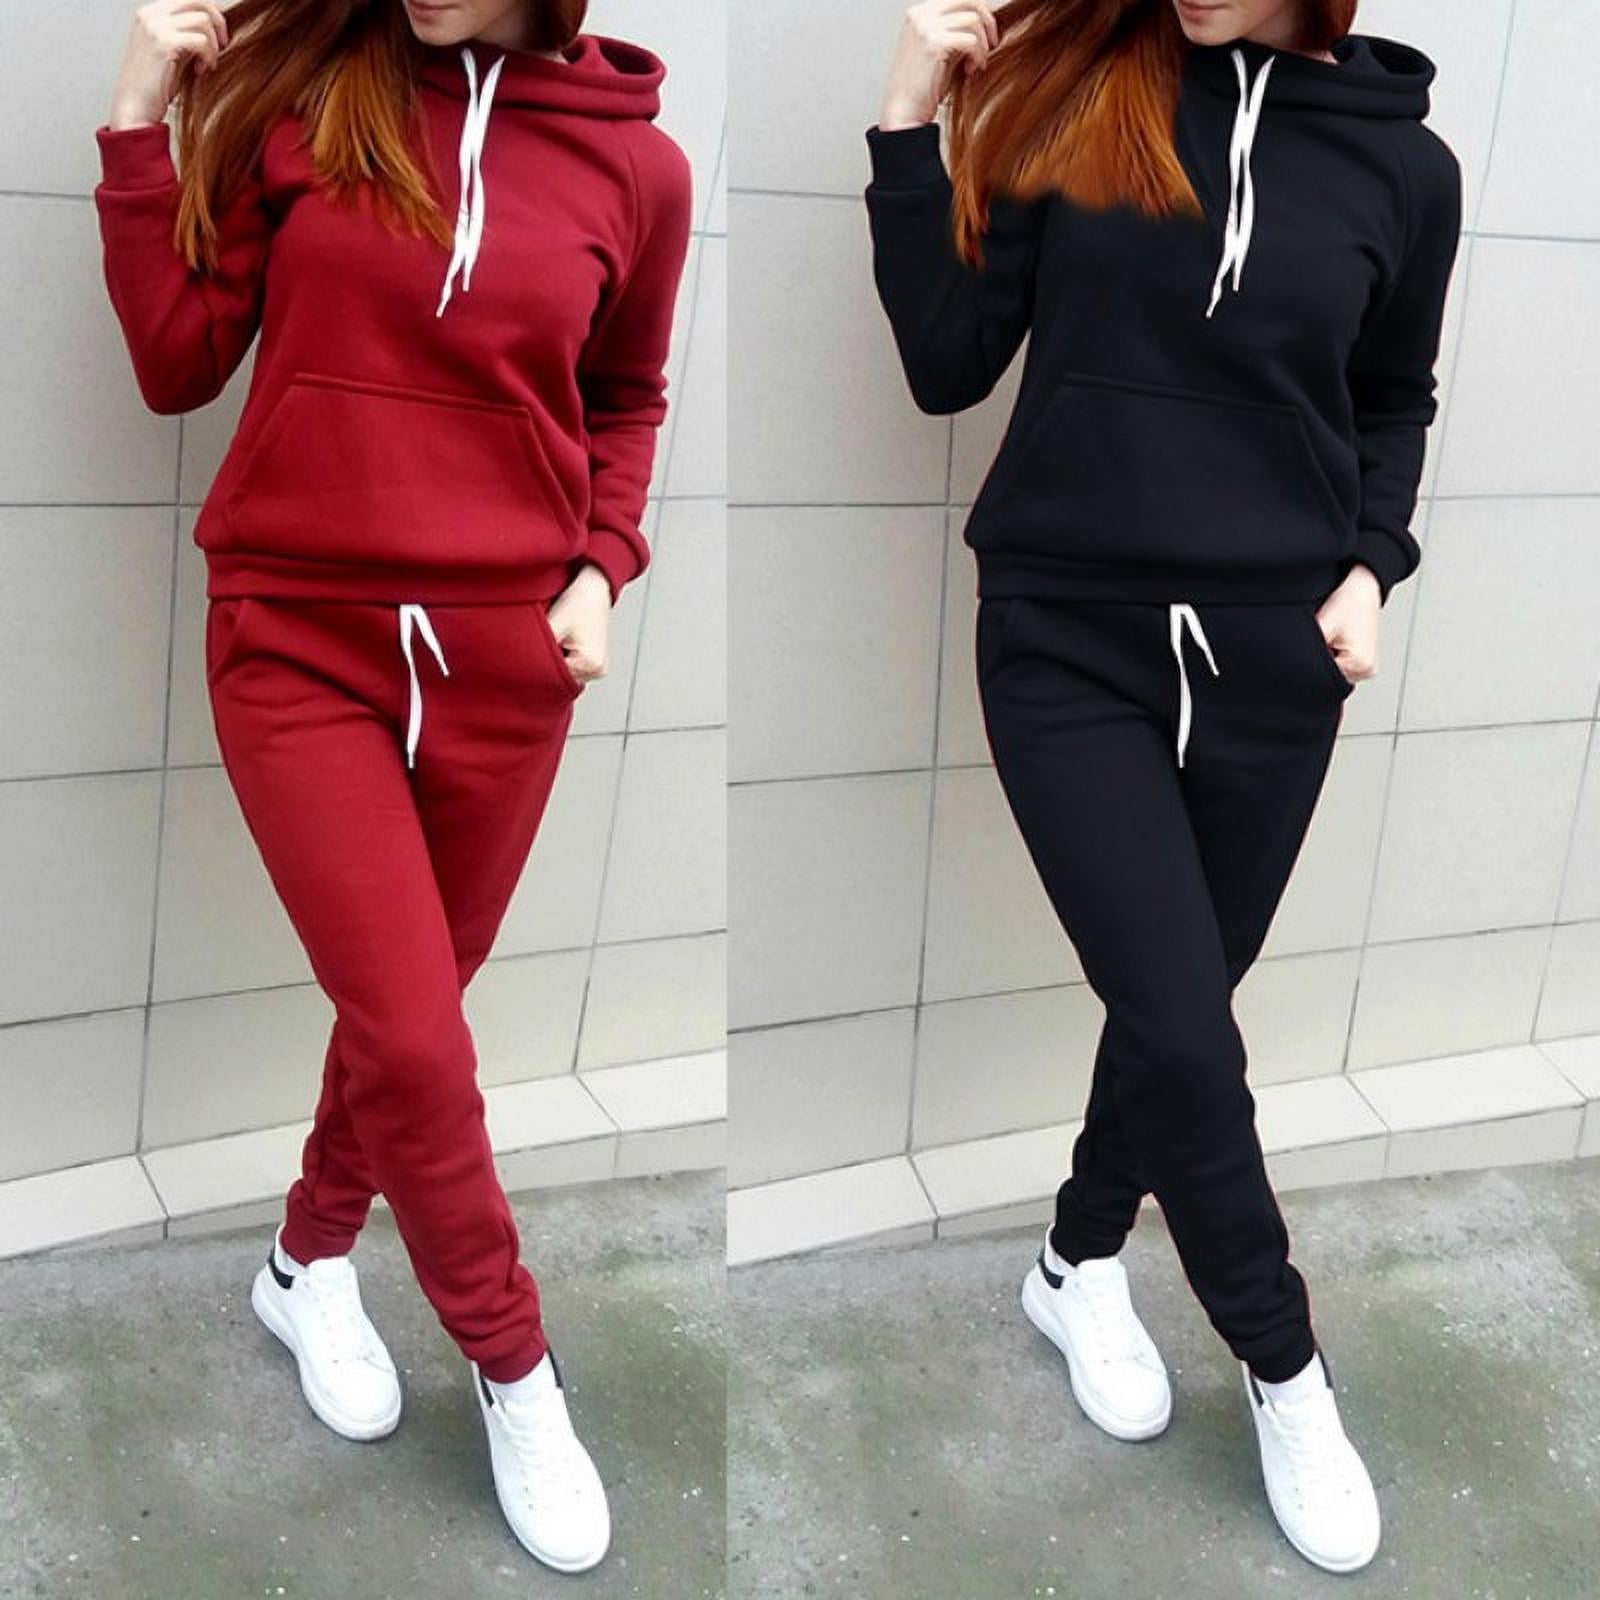 Women's Sweatsuit Set Long Sleeve Hooded Sweatshirt and Sweatpants 2 Piece Tracksuits Outfits with Pocket S-3XL 